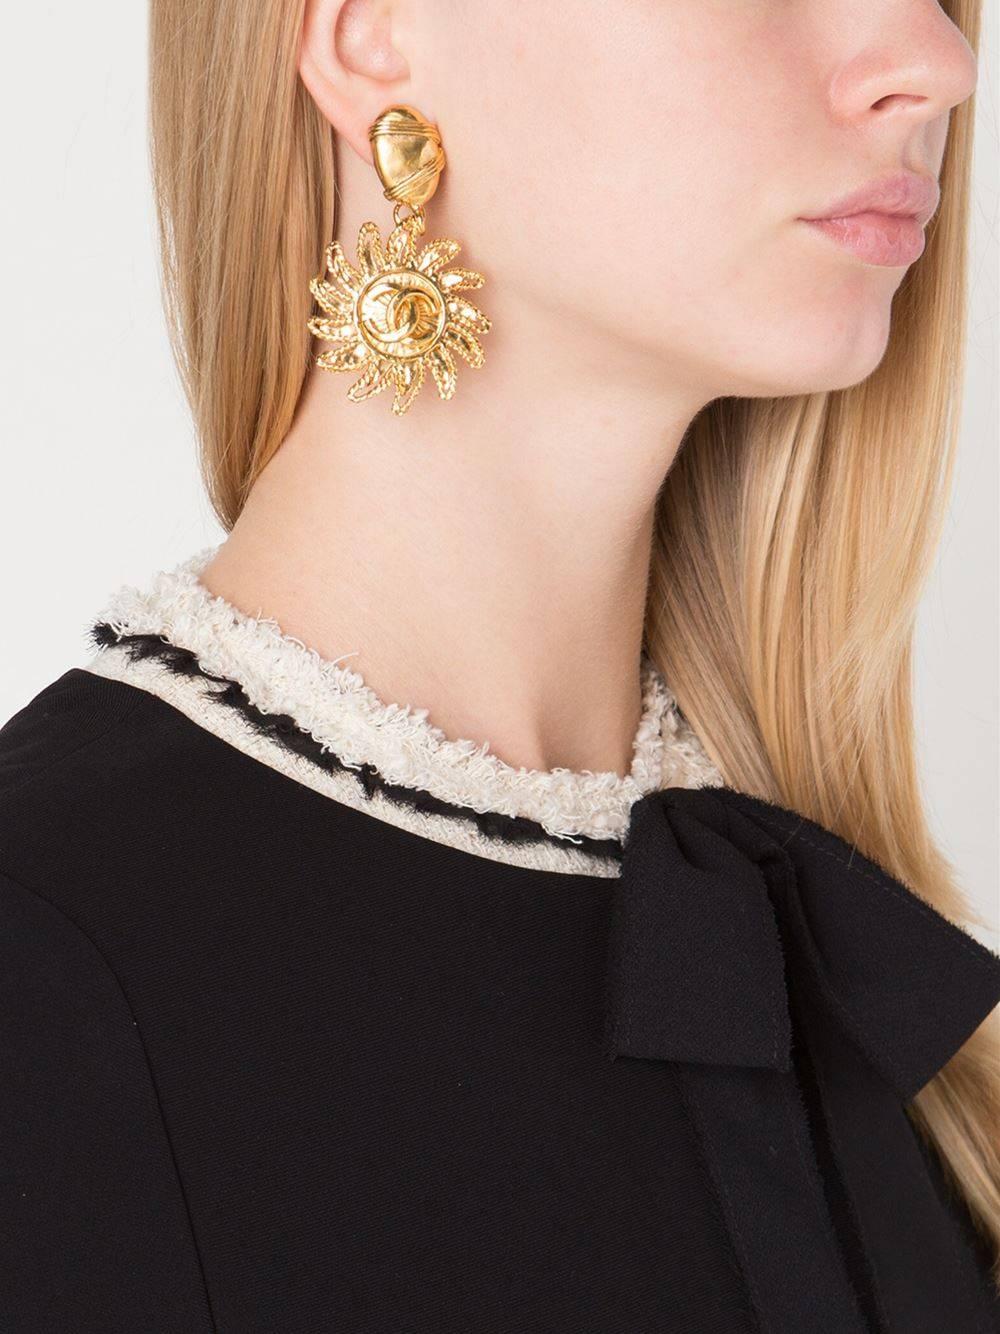 Give me the sun draped in CC's.  Ultra chic Chanel vintage gold plated sun motif dangle earrings.

Metal
Gold tone
Clip-on
Made in France
Measures  3" L x 1.7" W x 1.6" H
Includes complimentary pair of new earring backs